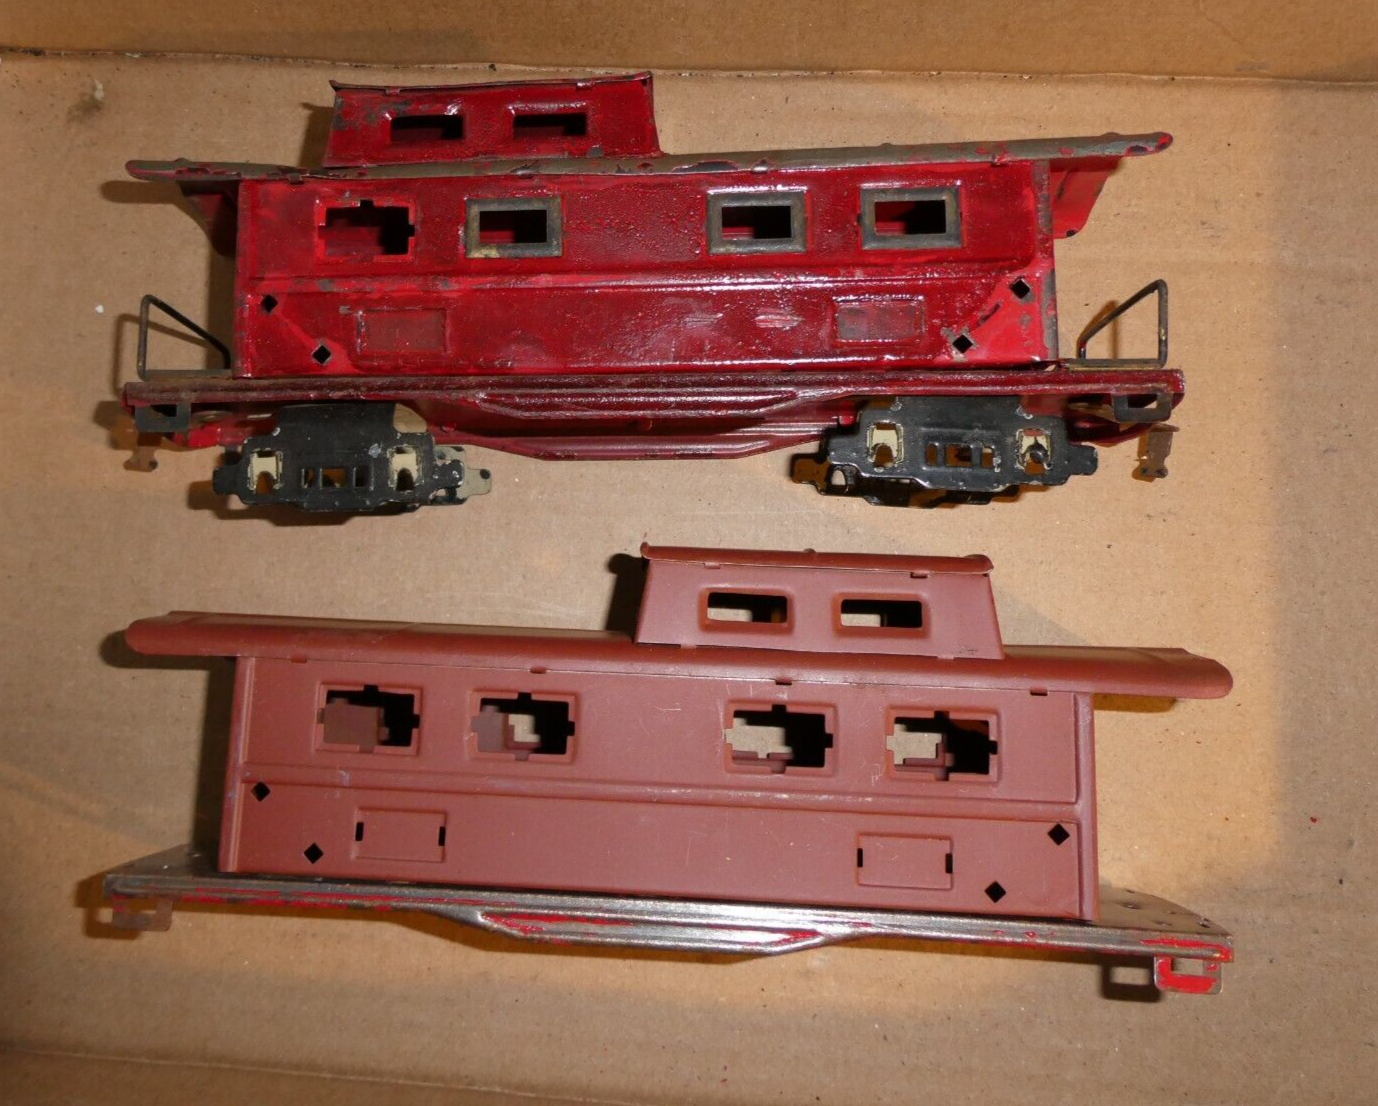 Lot of 2 Vintage O Scale American Flyer Caboose Car Bodies 9.5" Long - $21.78